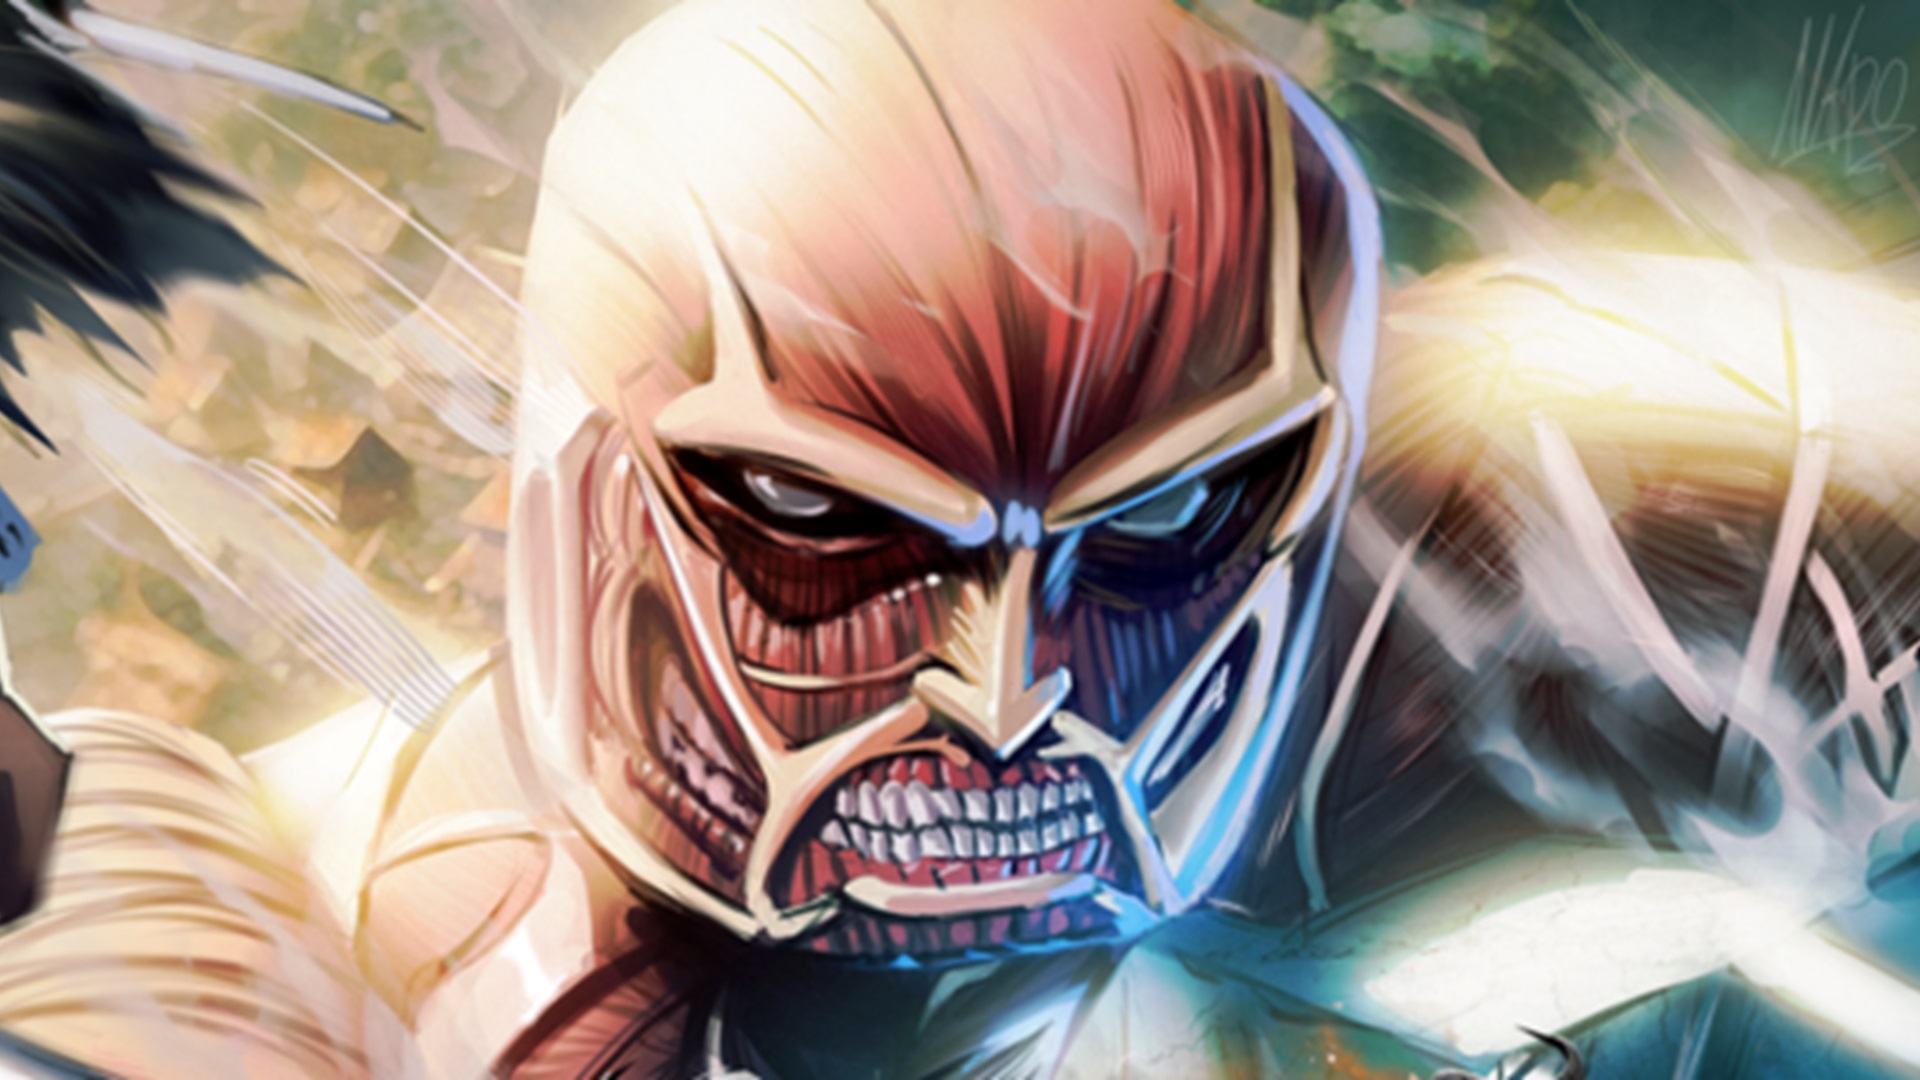 This Attack on Titan fan game has a free demo that looks too good